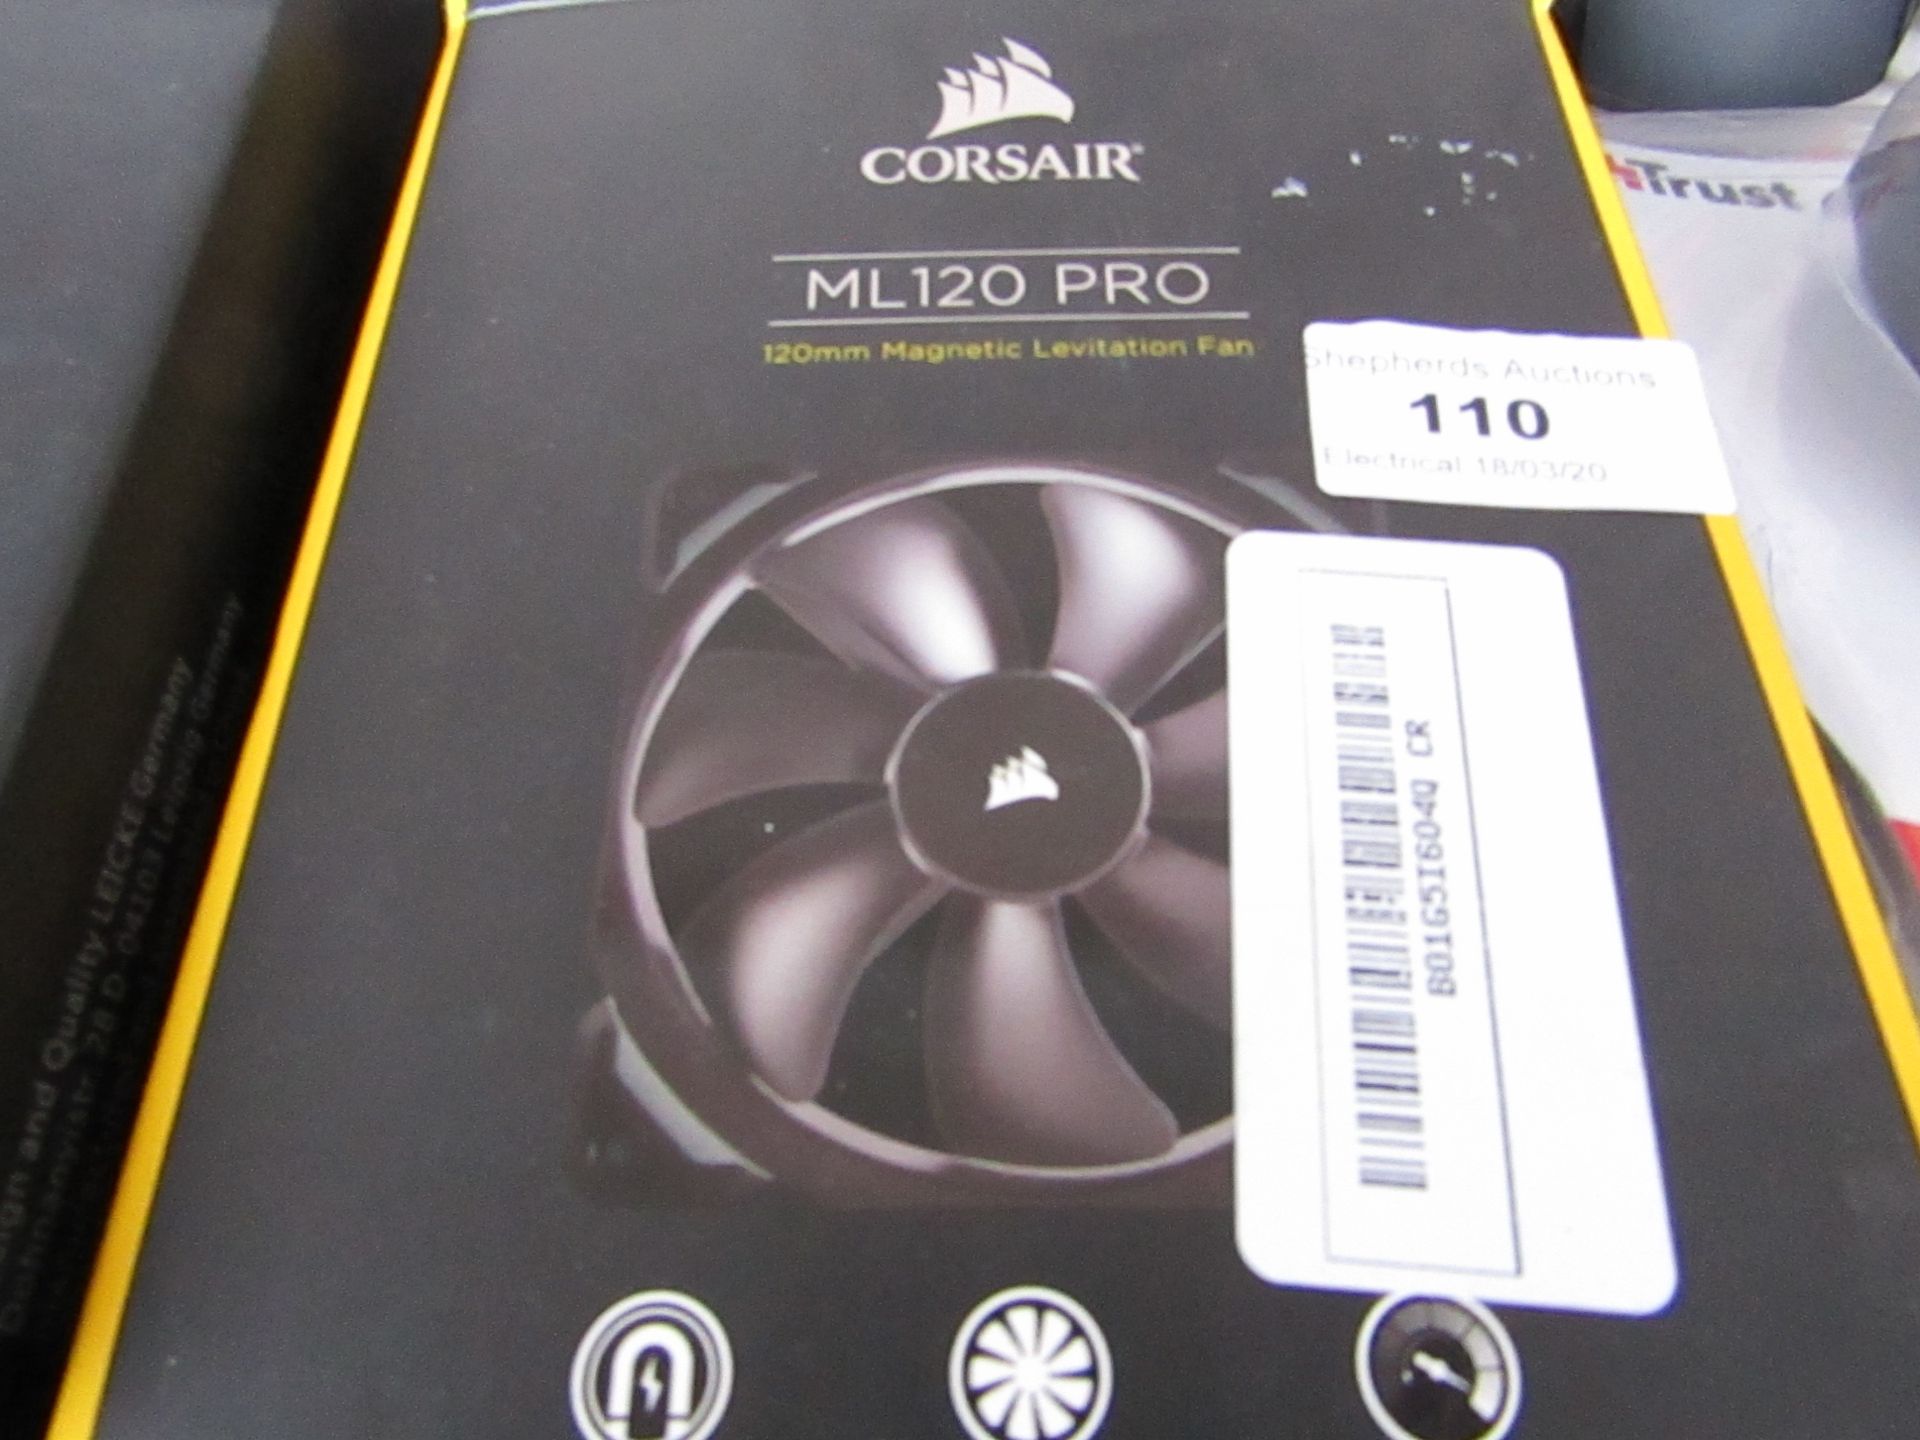 CORSAIR - ML120 PRO - 120mm Magnetic Levitation Fan - Untested and Boxed.